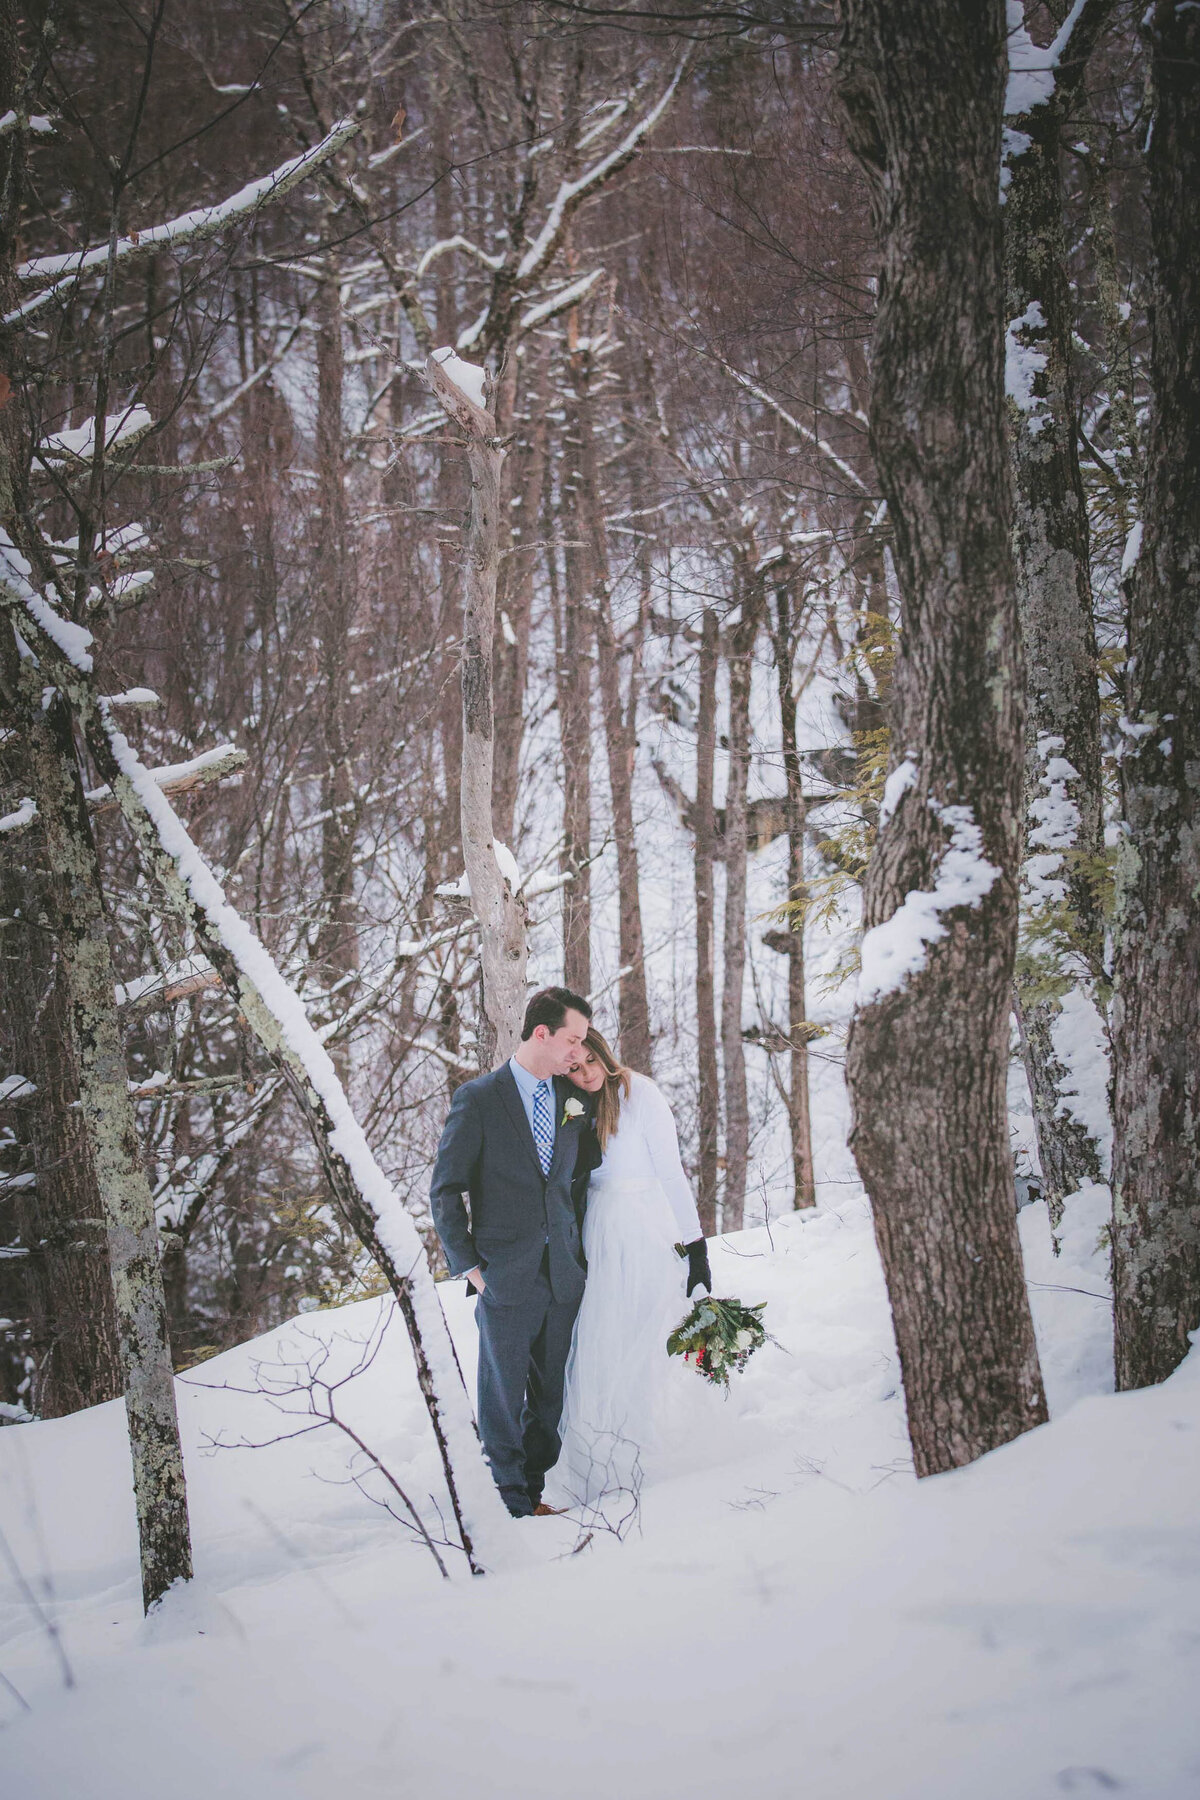 Bride and groom are surrounded in snowy landscape.